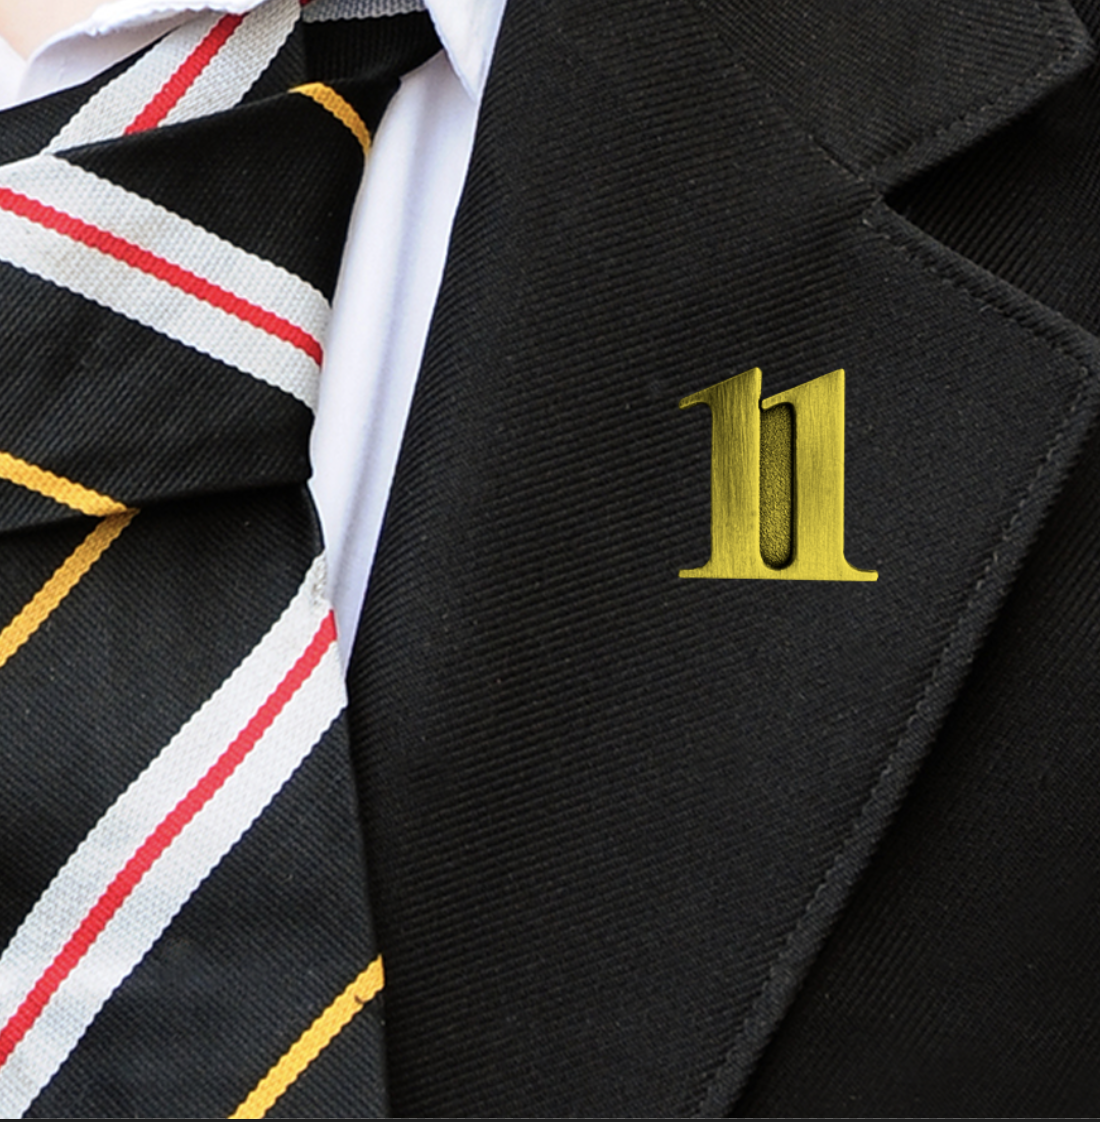 YEAR 11 BADGE IN GOLD